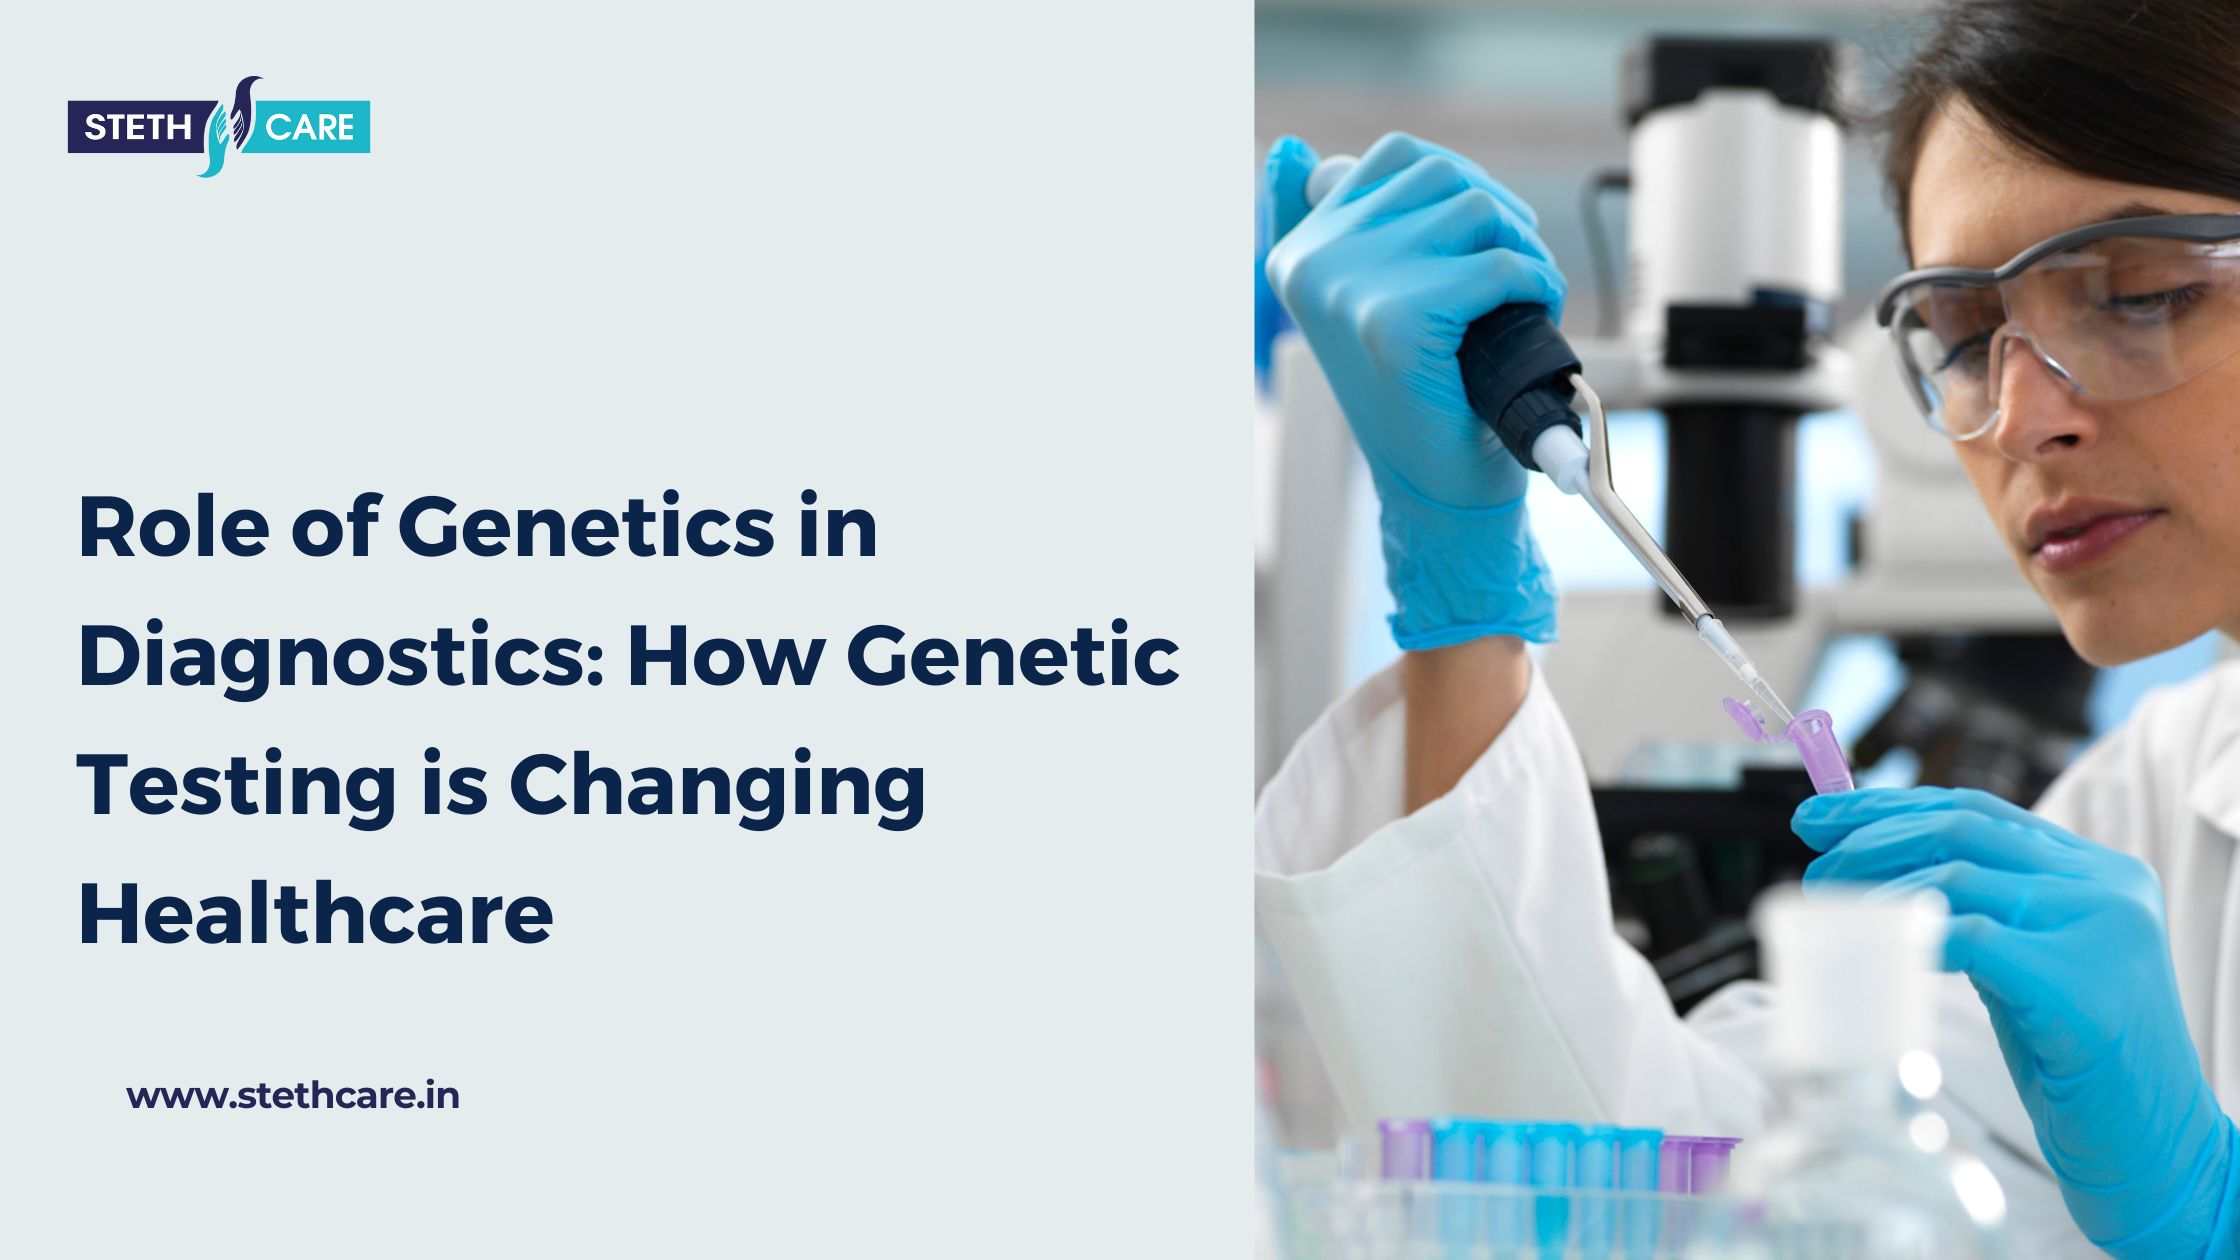 Role of Genetics in Diagnostic: How Genetic Testing is Changing Healthcare